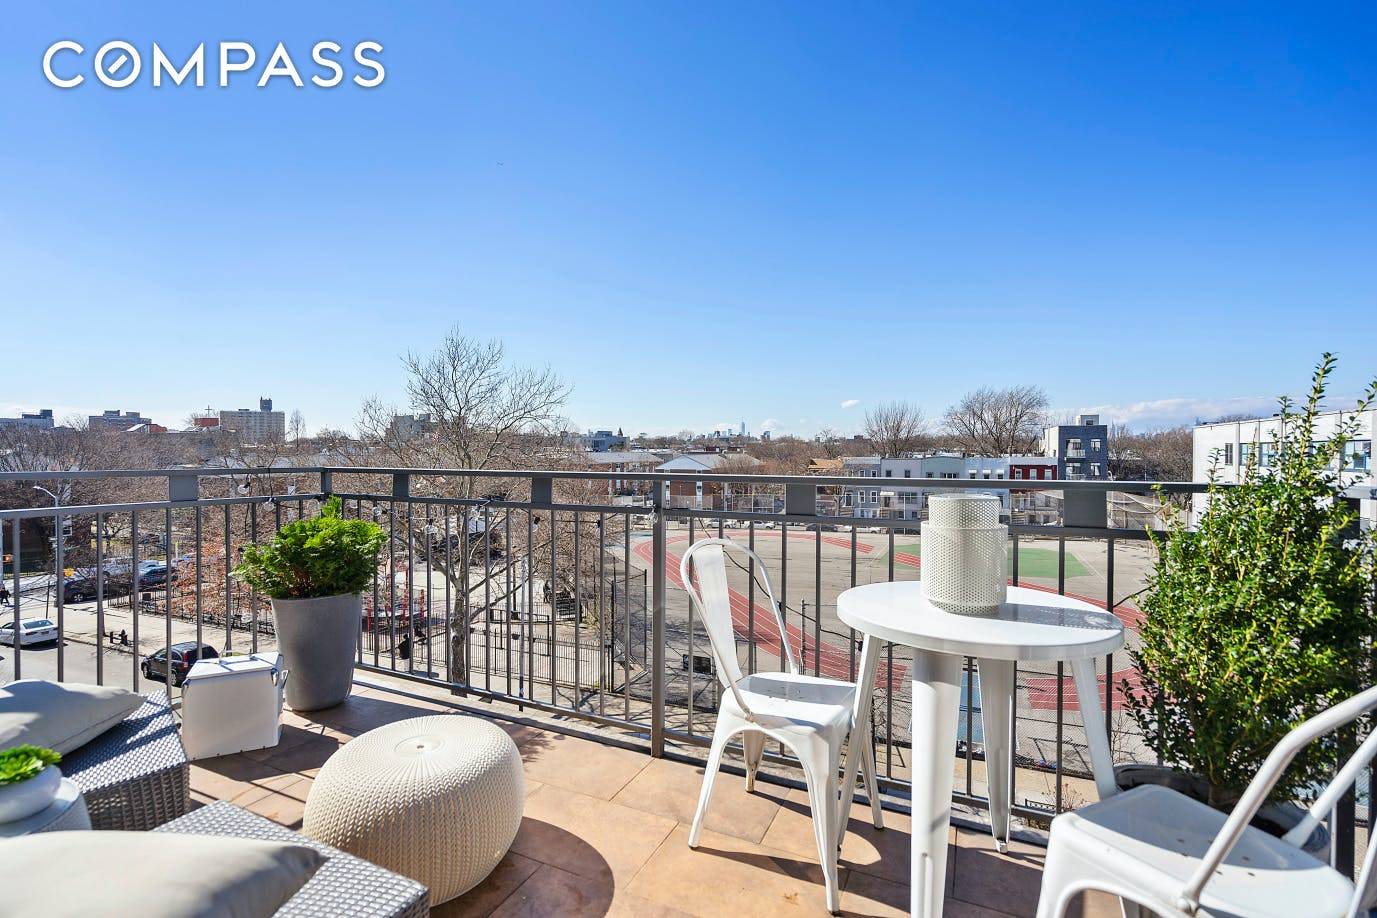 Experience this Bushwick gem featuring contemporary modern design throughout that captures the sunlight through nearly full wall windows and provides great city views.